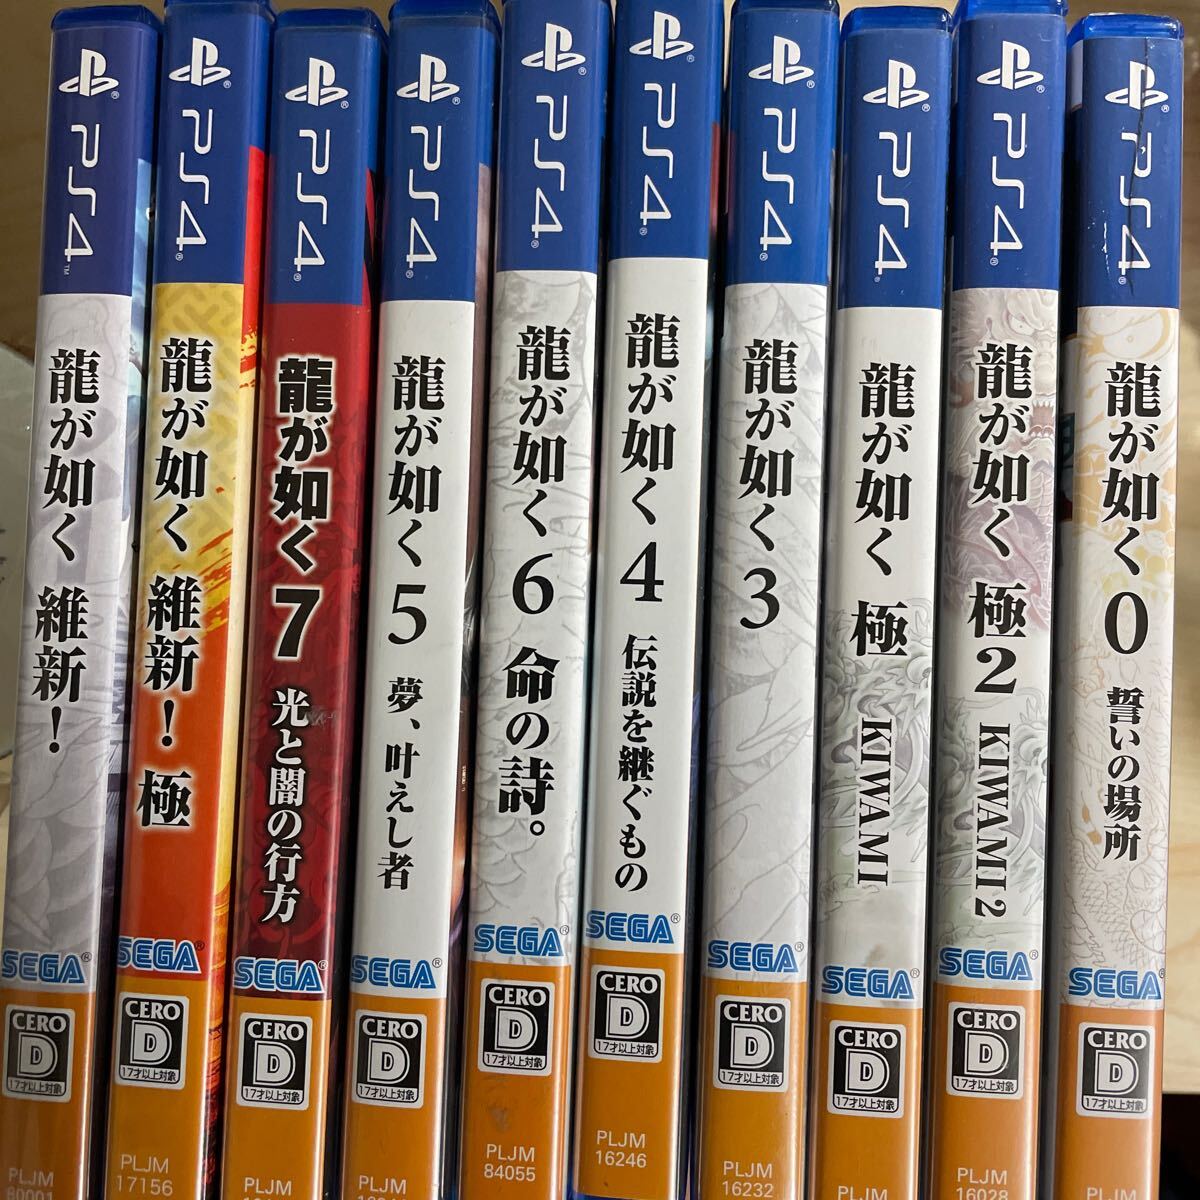 PS4ソフト 龍が如く10本セット まとめ 0/極/極2/3/4/5/6/7/維新/維新極/ 中古_画像1